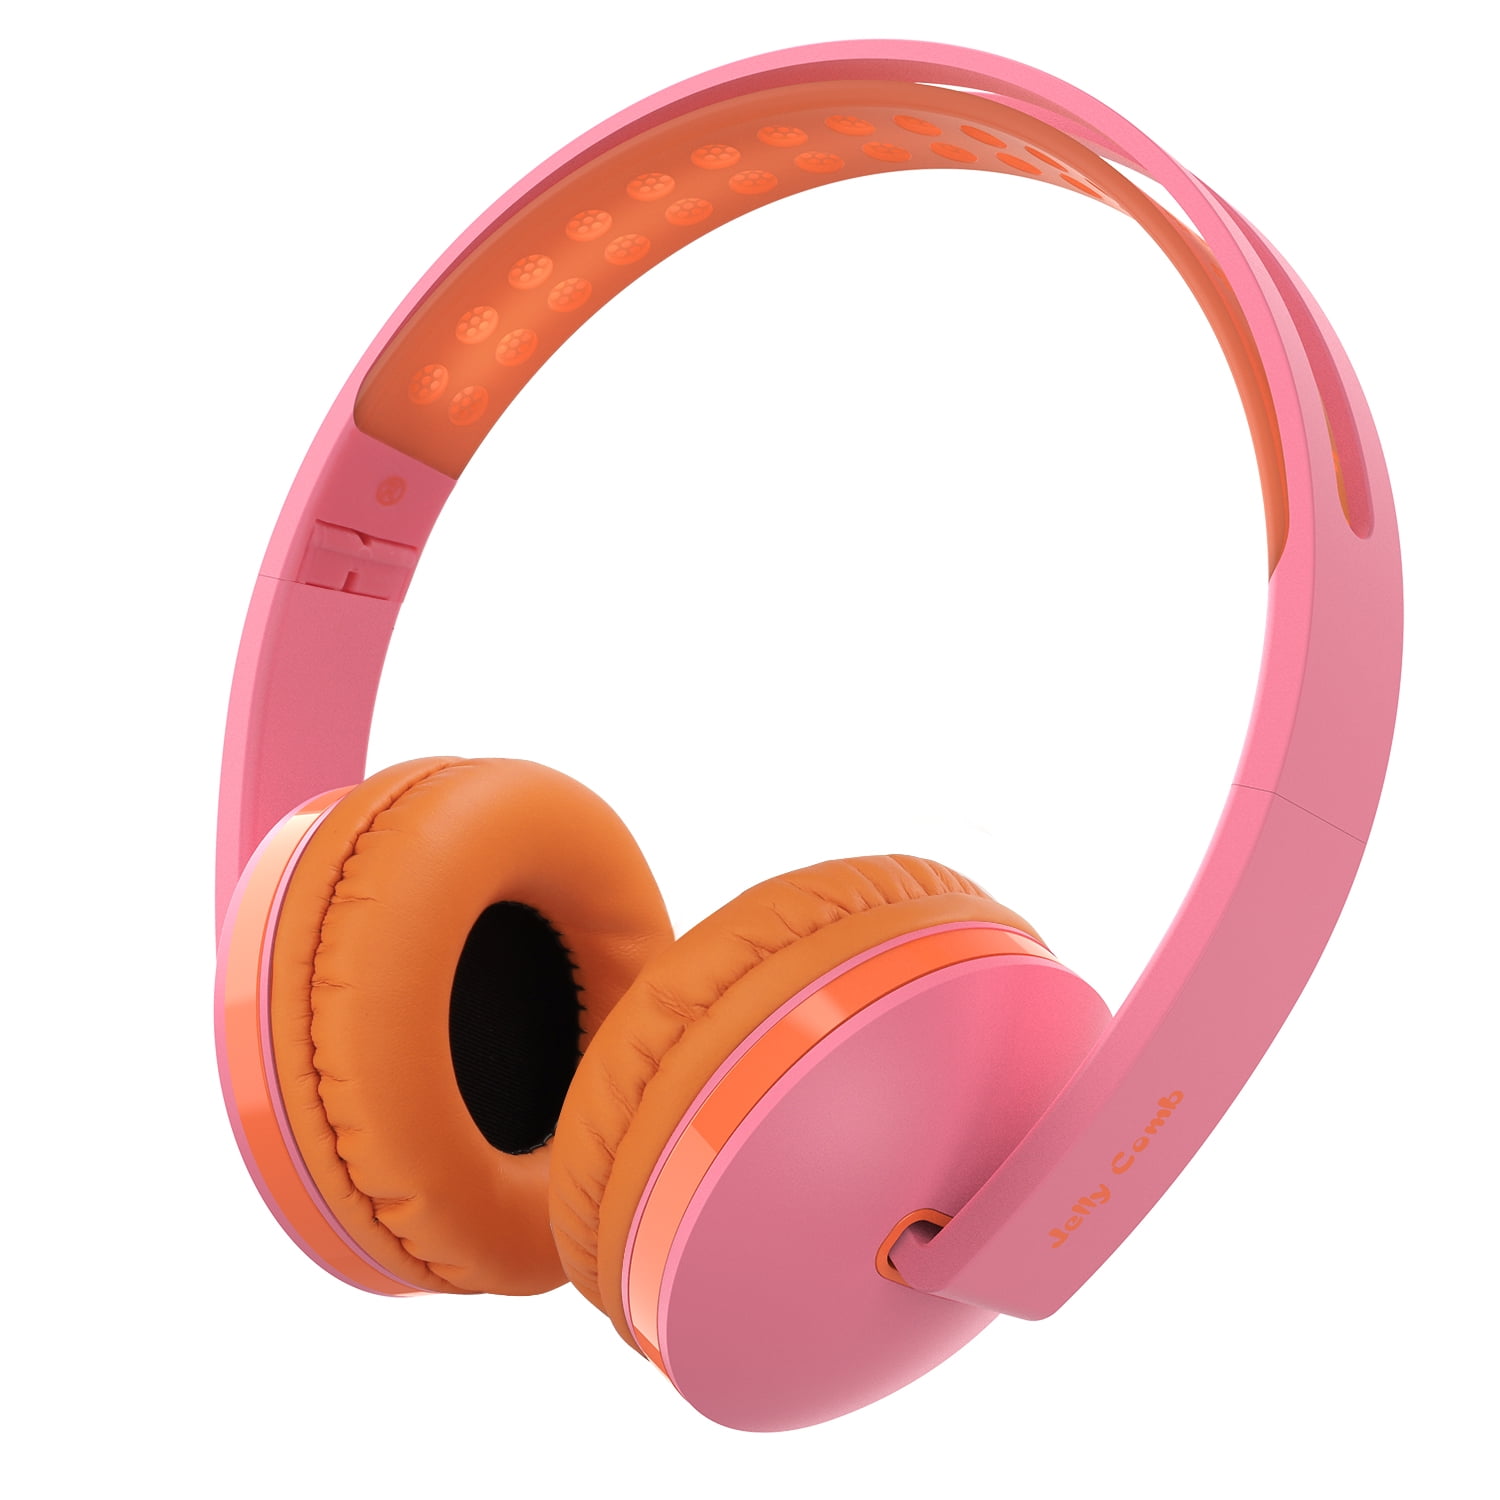 On Ear Headphones with Mic, Jelly Comb Foldable Corded Headphones Wired Headsets with Microphone, Volume Control for Cell Phone, Tablet, PC, Laptop, MP3/4, Video Game (Rose &amp; Orange)